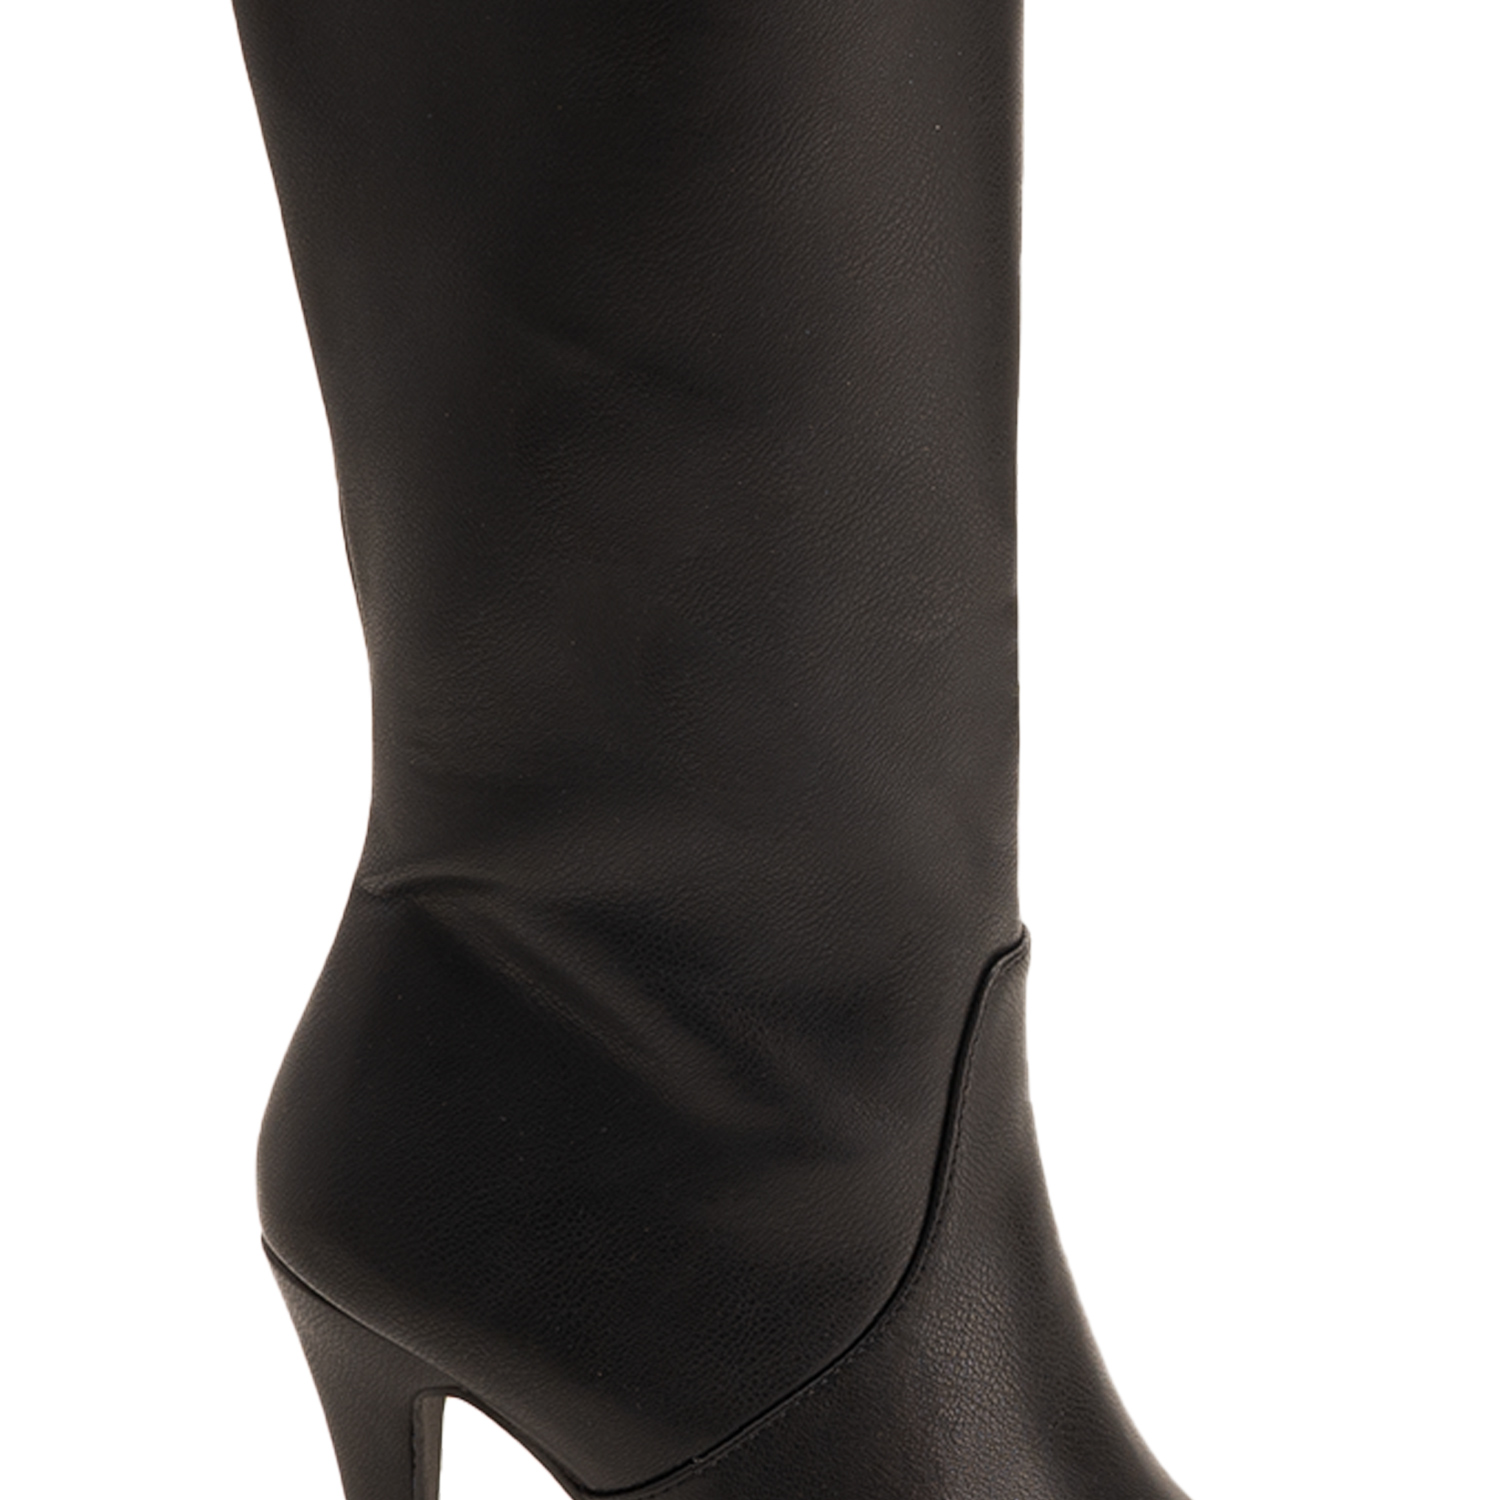 Heeled boots in black faux leather 